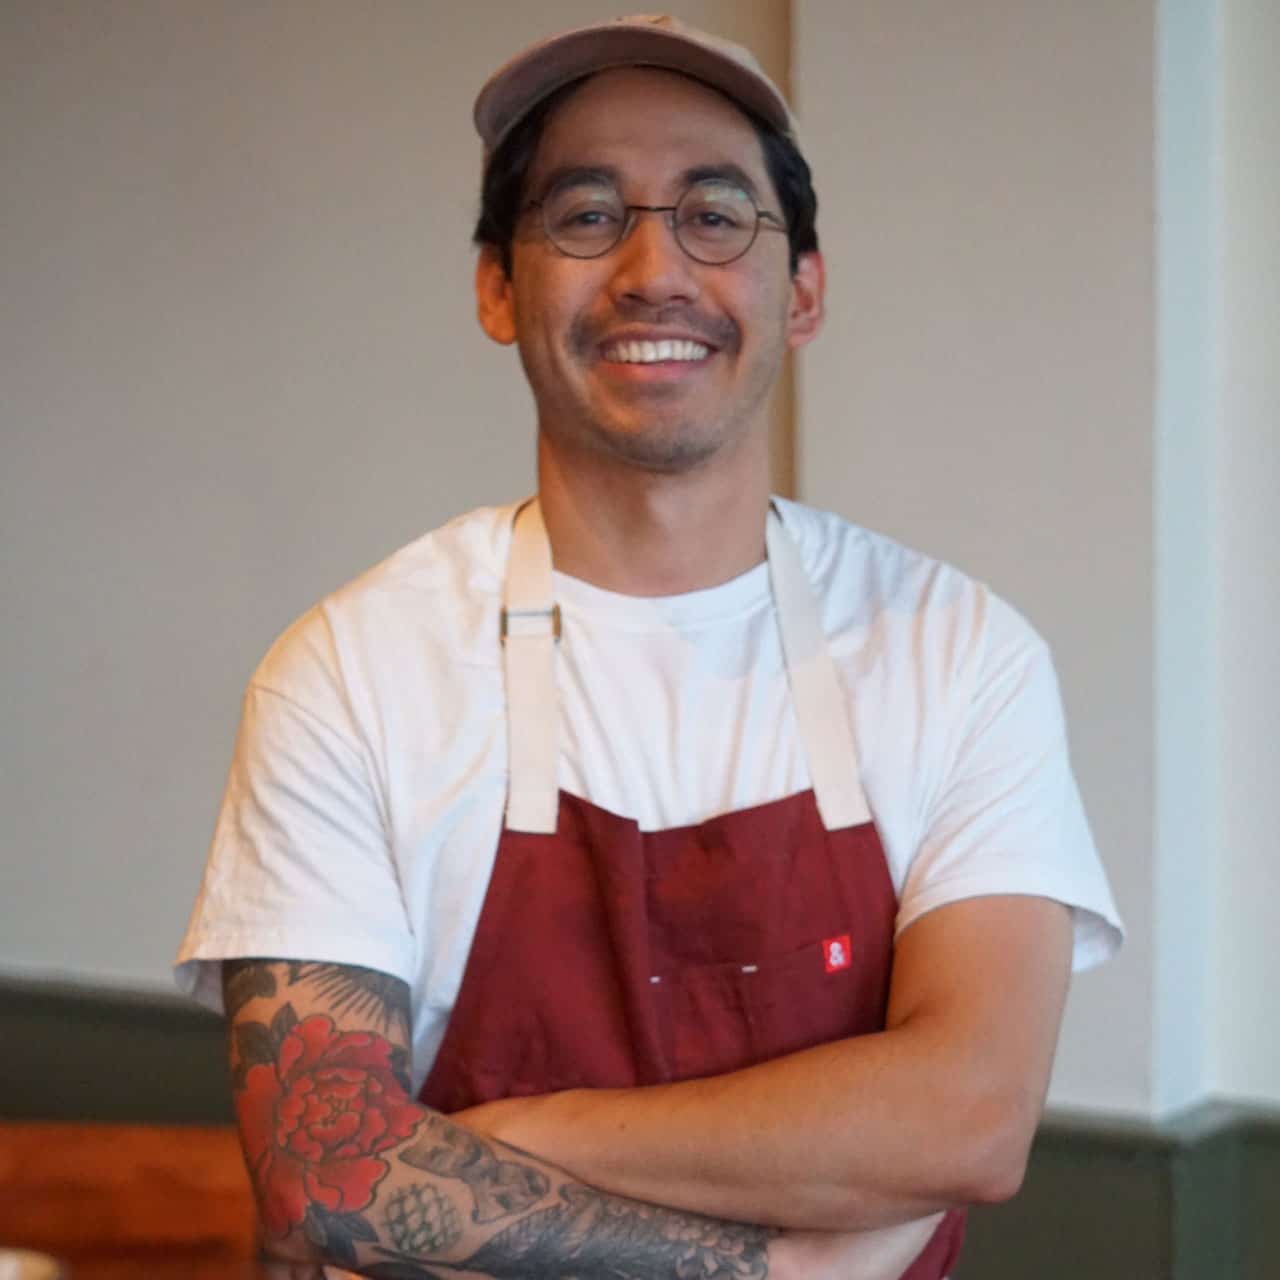 Elijah-Deleon smiling with his arms crossed in a red apron